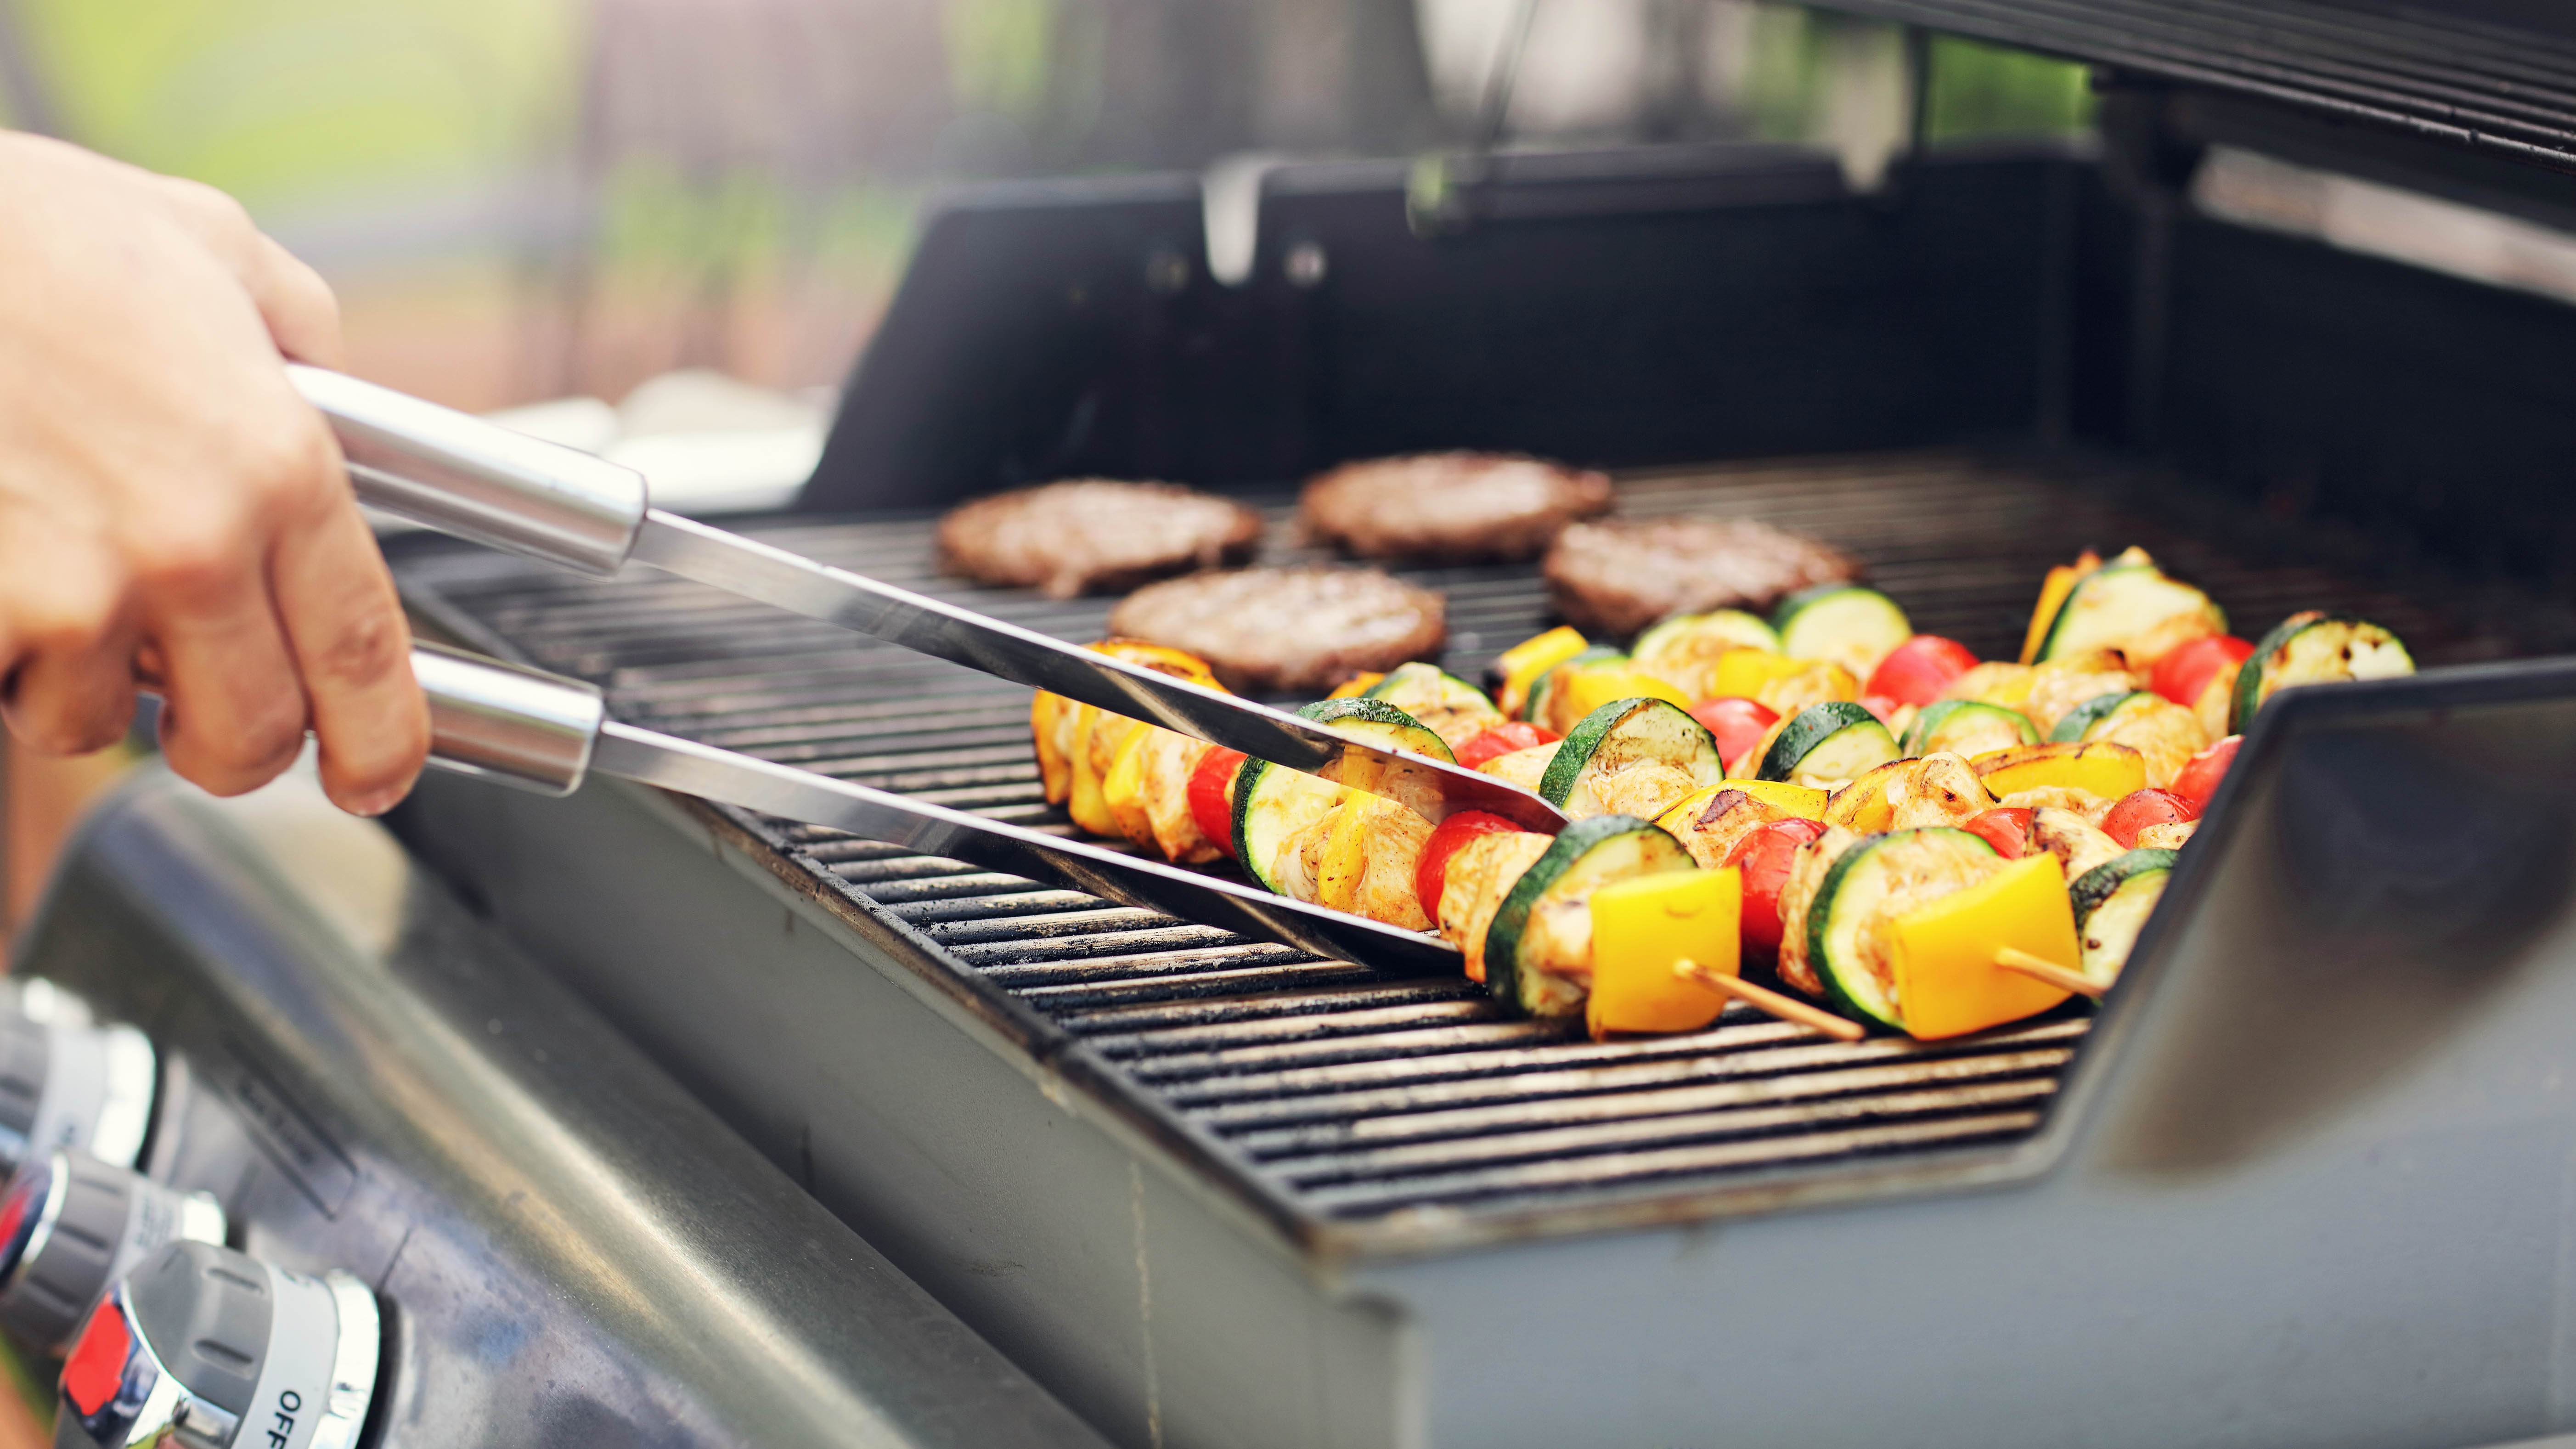 Someone grilling vegetable skewers and burgers on a gas grill